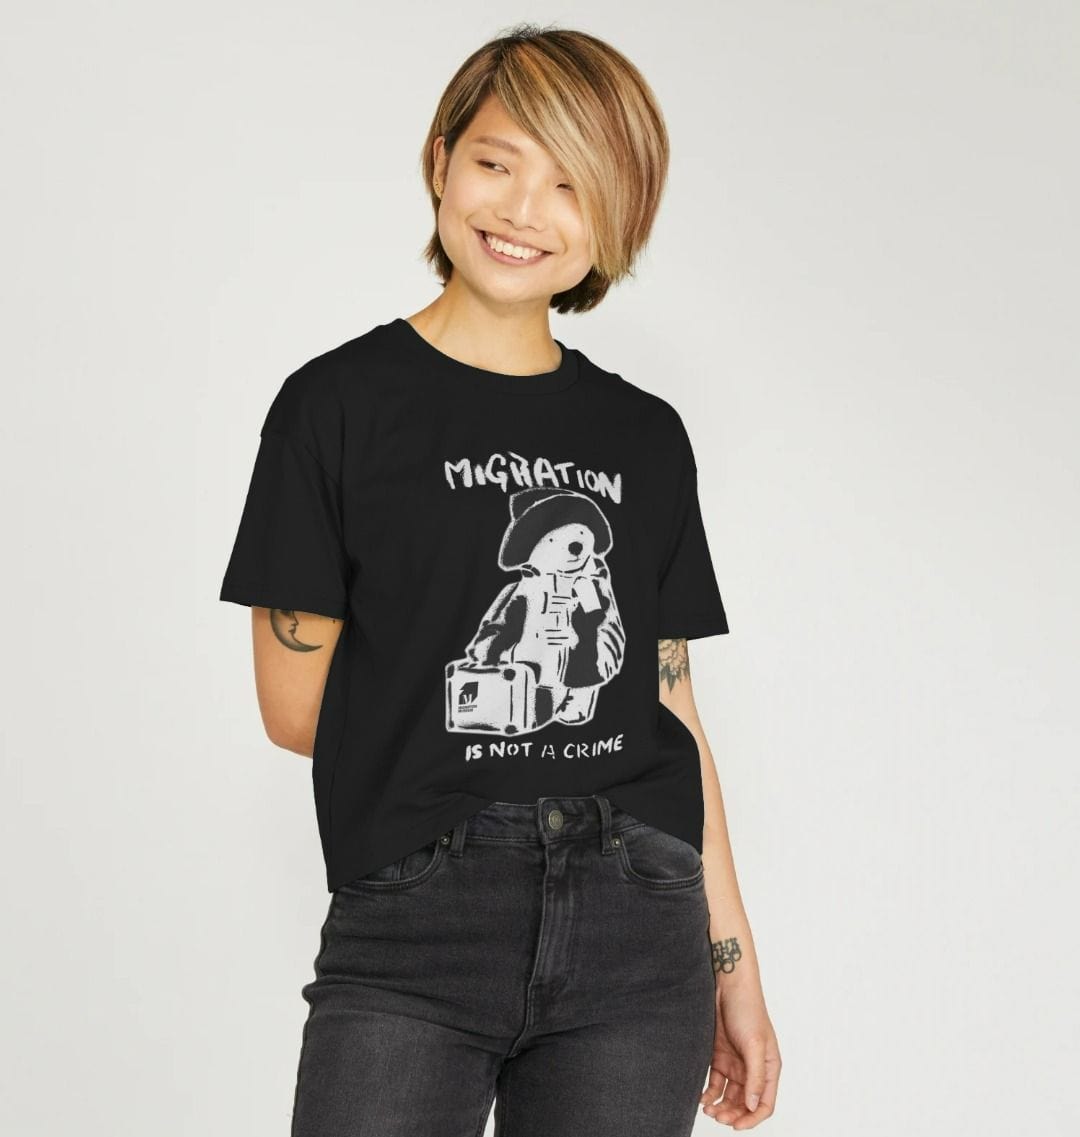 Migration Is Not a Crime - Organic Cotton Women's Boxy Tee.